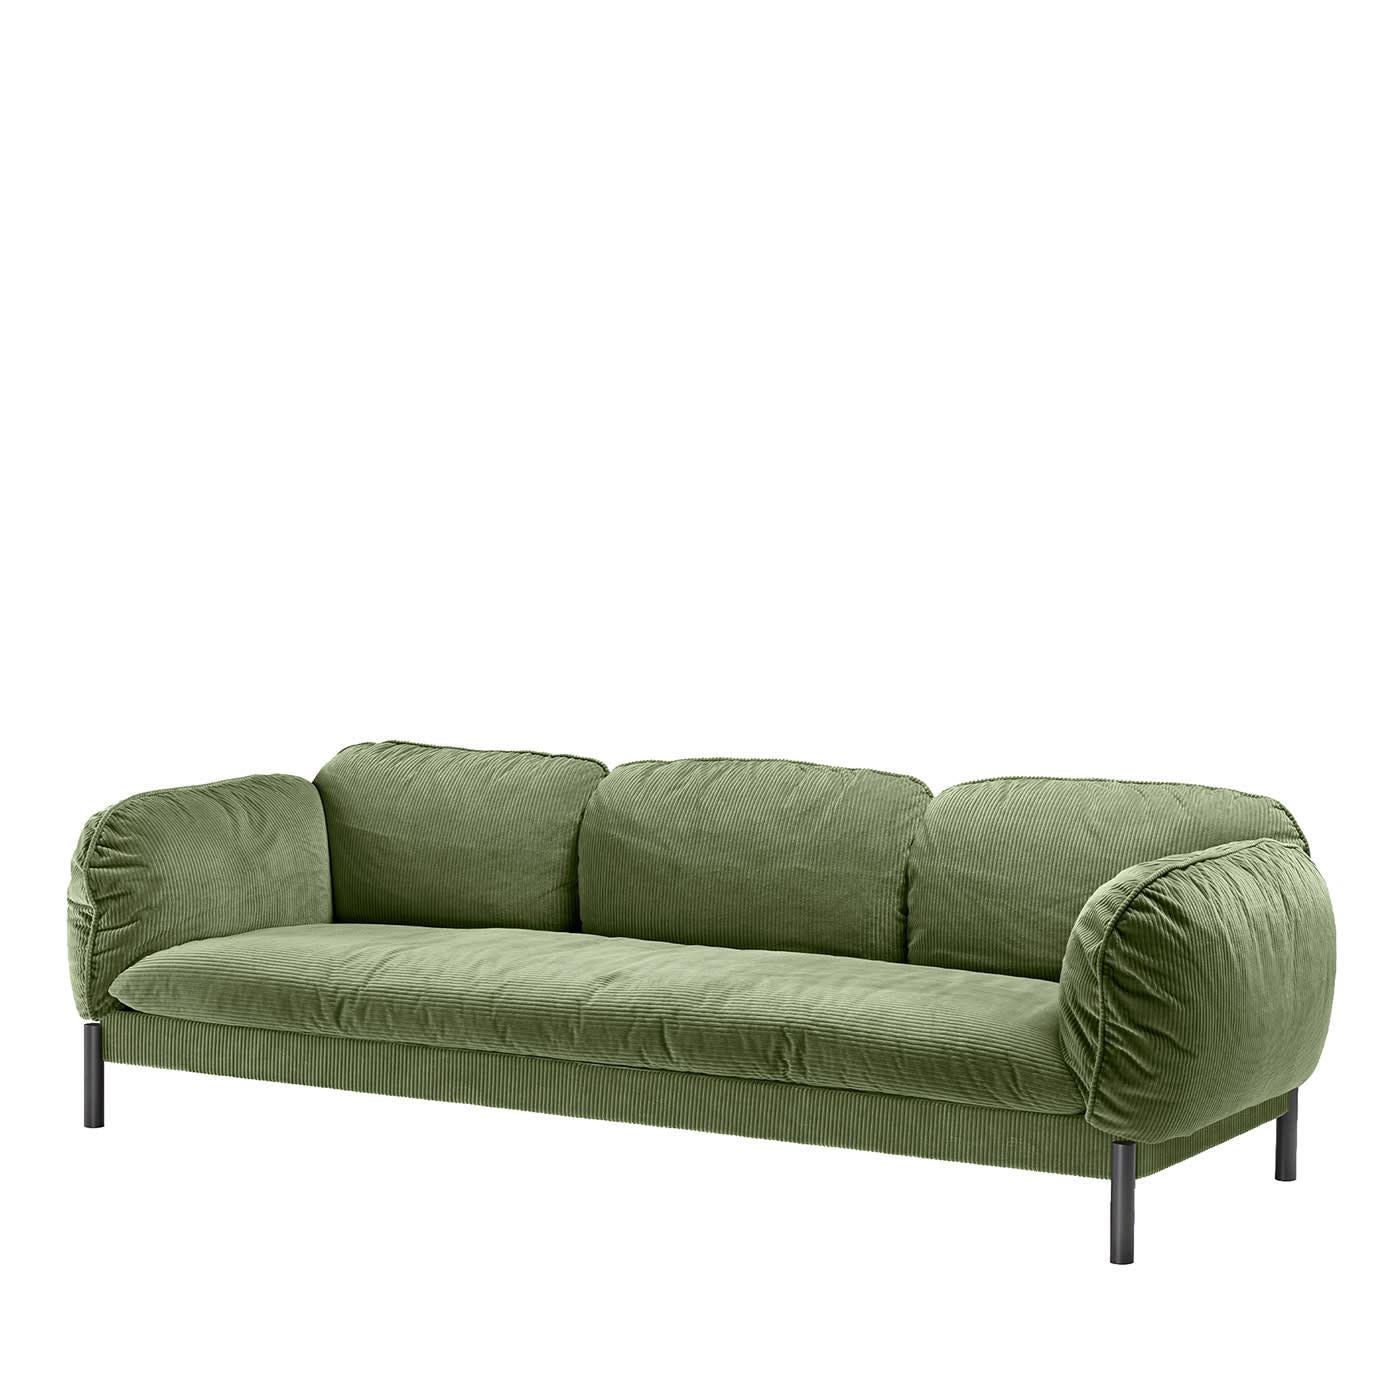 Either to watch a movie enveloped in one's favorite blanket or to chat with a friend while having a cup of tea, this sofa will be a good idea to enjoy impeccable comfort. Cylindrical feet sustain the frame, enriched by generously stuffed cushions